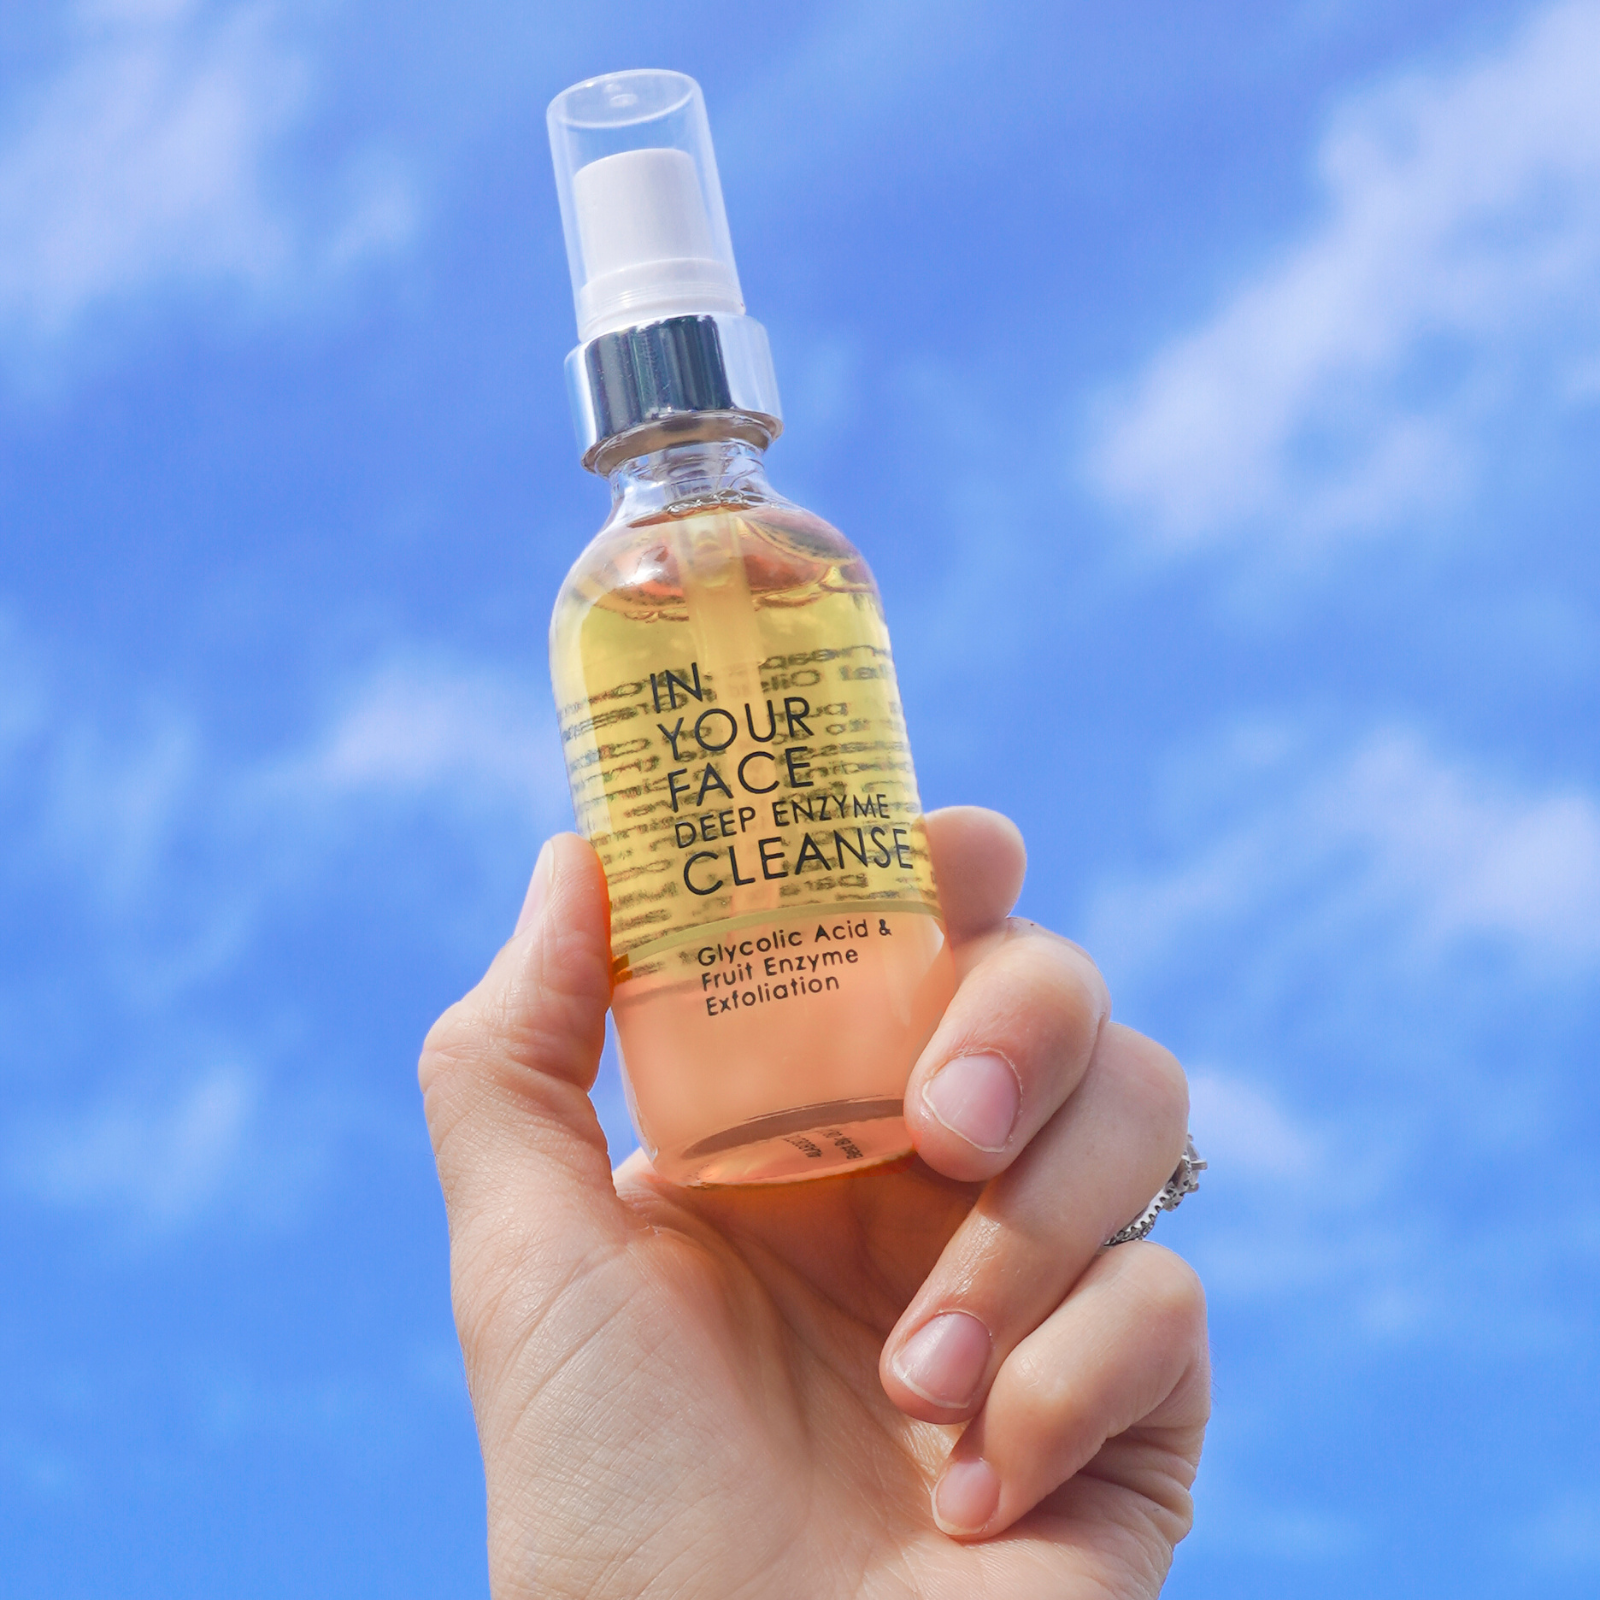 a bottle of the DEEP ENZYME CLEANSE being held in a hand up against a pretty blue sky with some out-of-focus clouds.